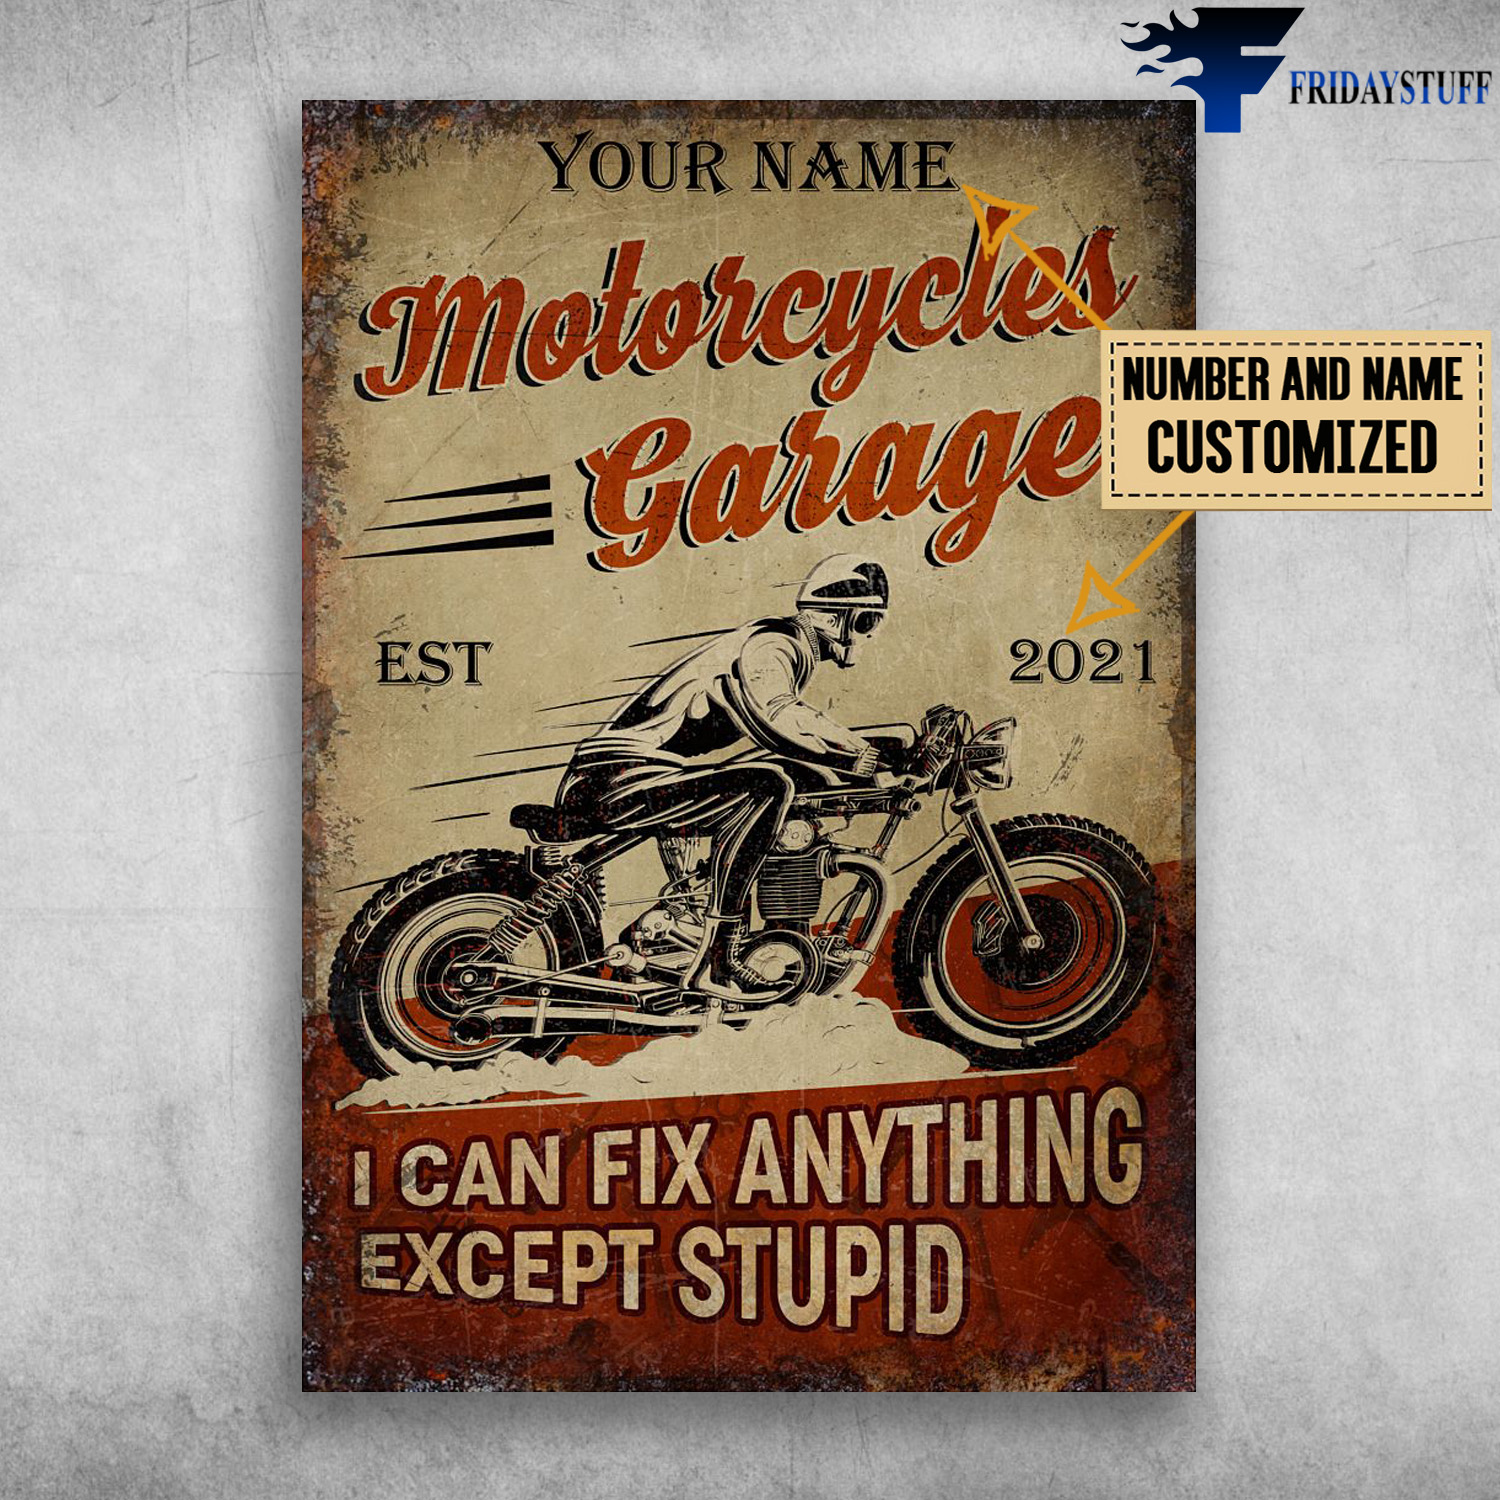 Motorcycles Garage, Biker Lover, I Can Fix Anything, Except Stupid